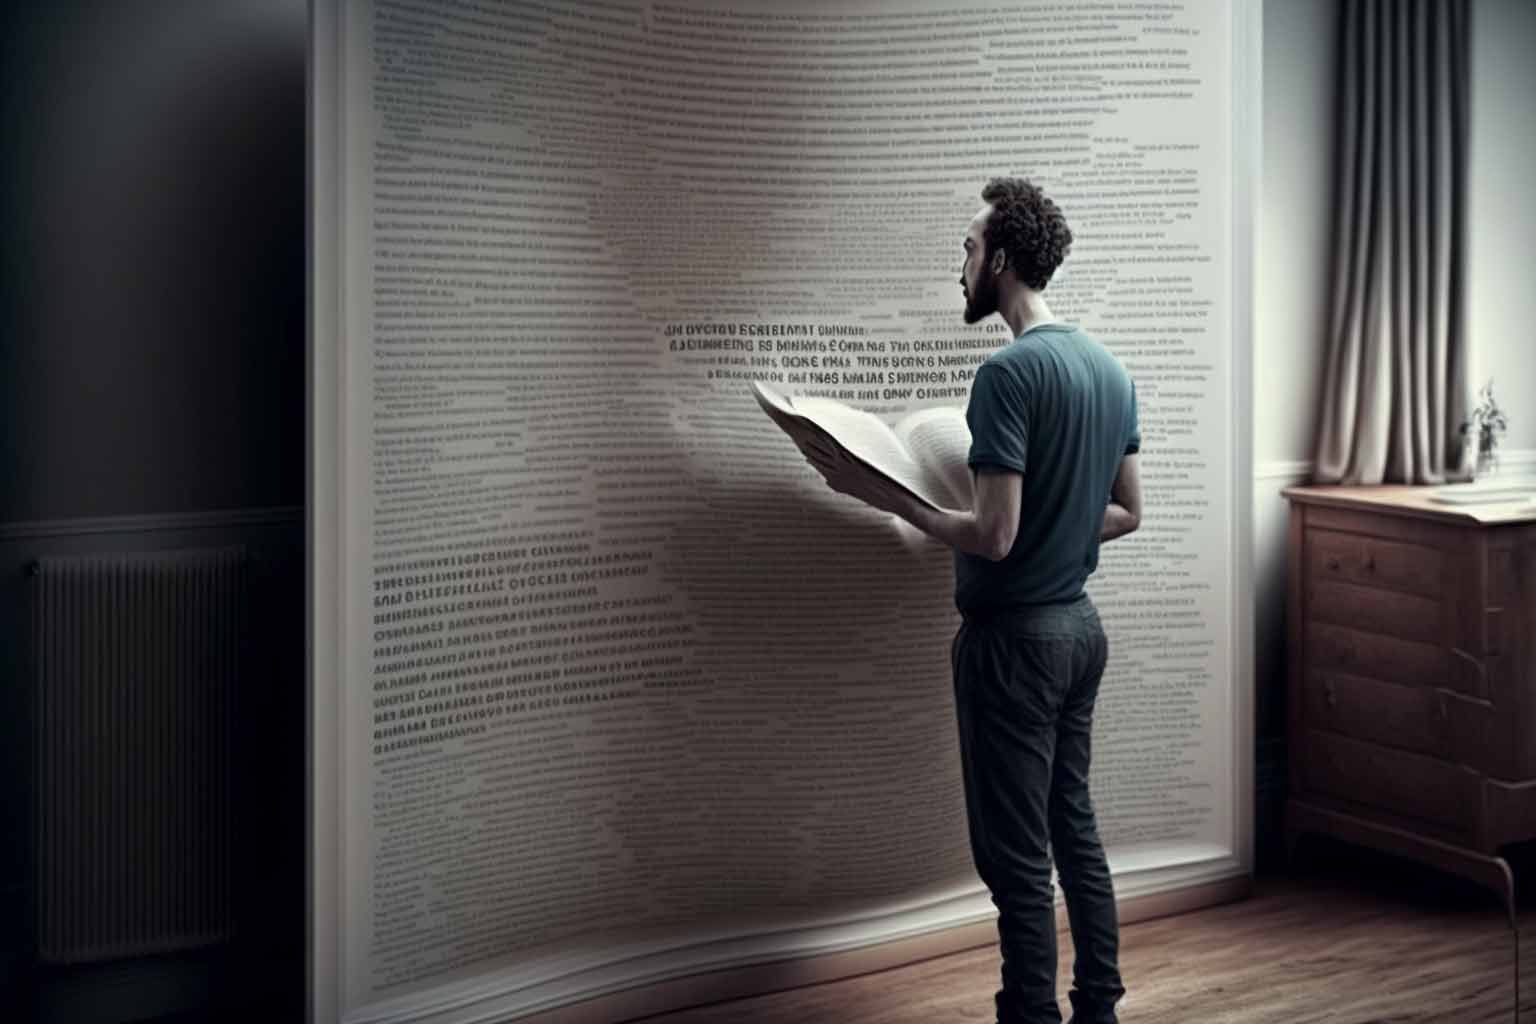 Image created using Midjourney AI. Prompt: someone reading a huge page of terms and services